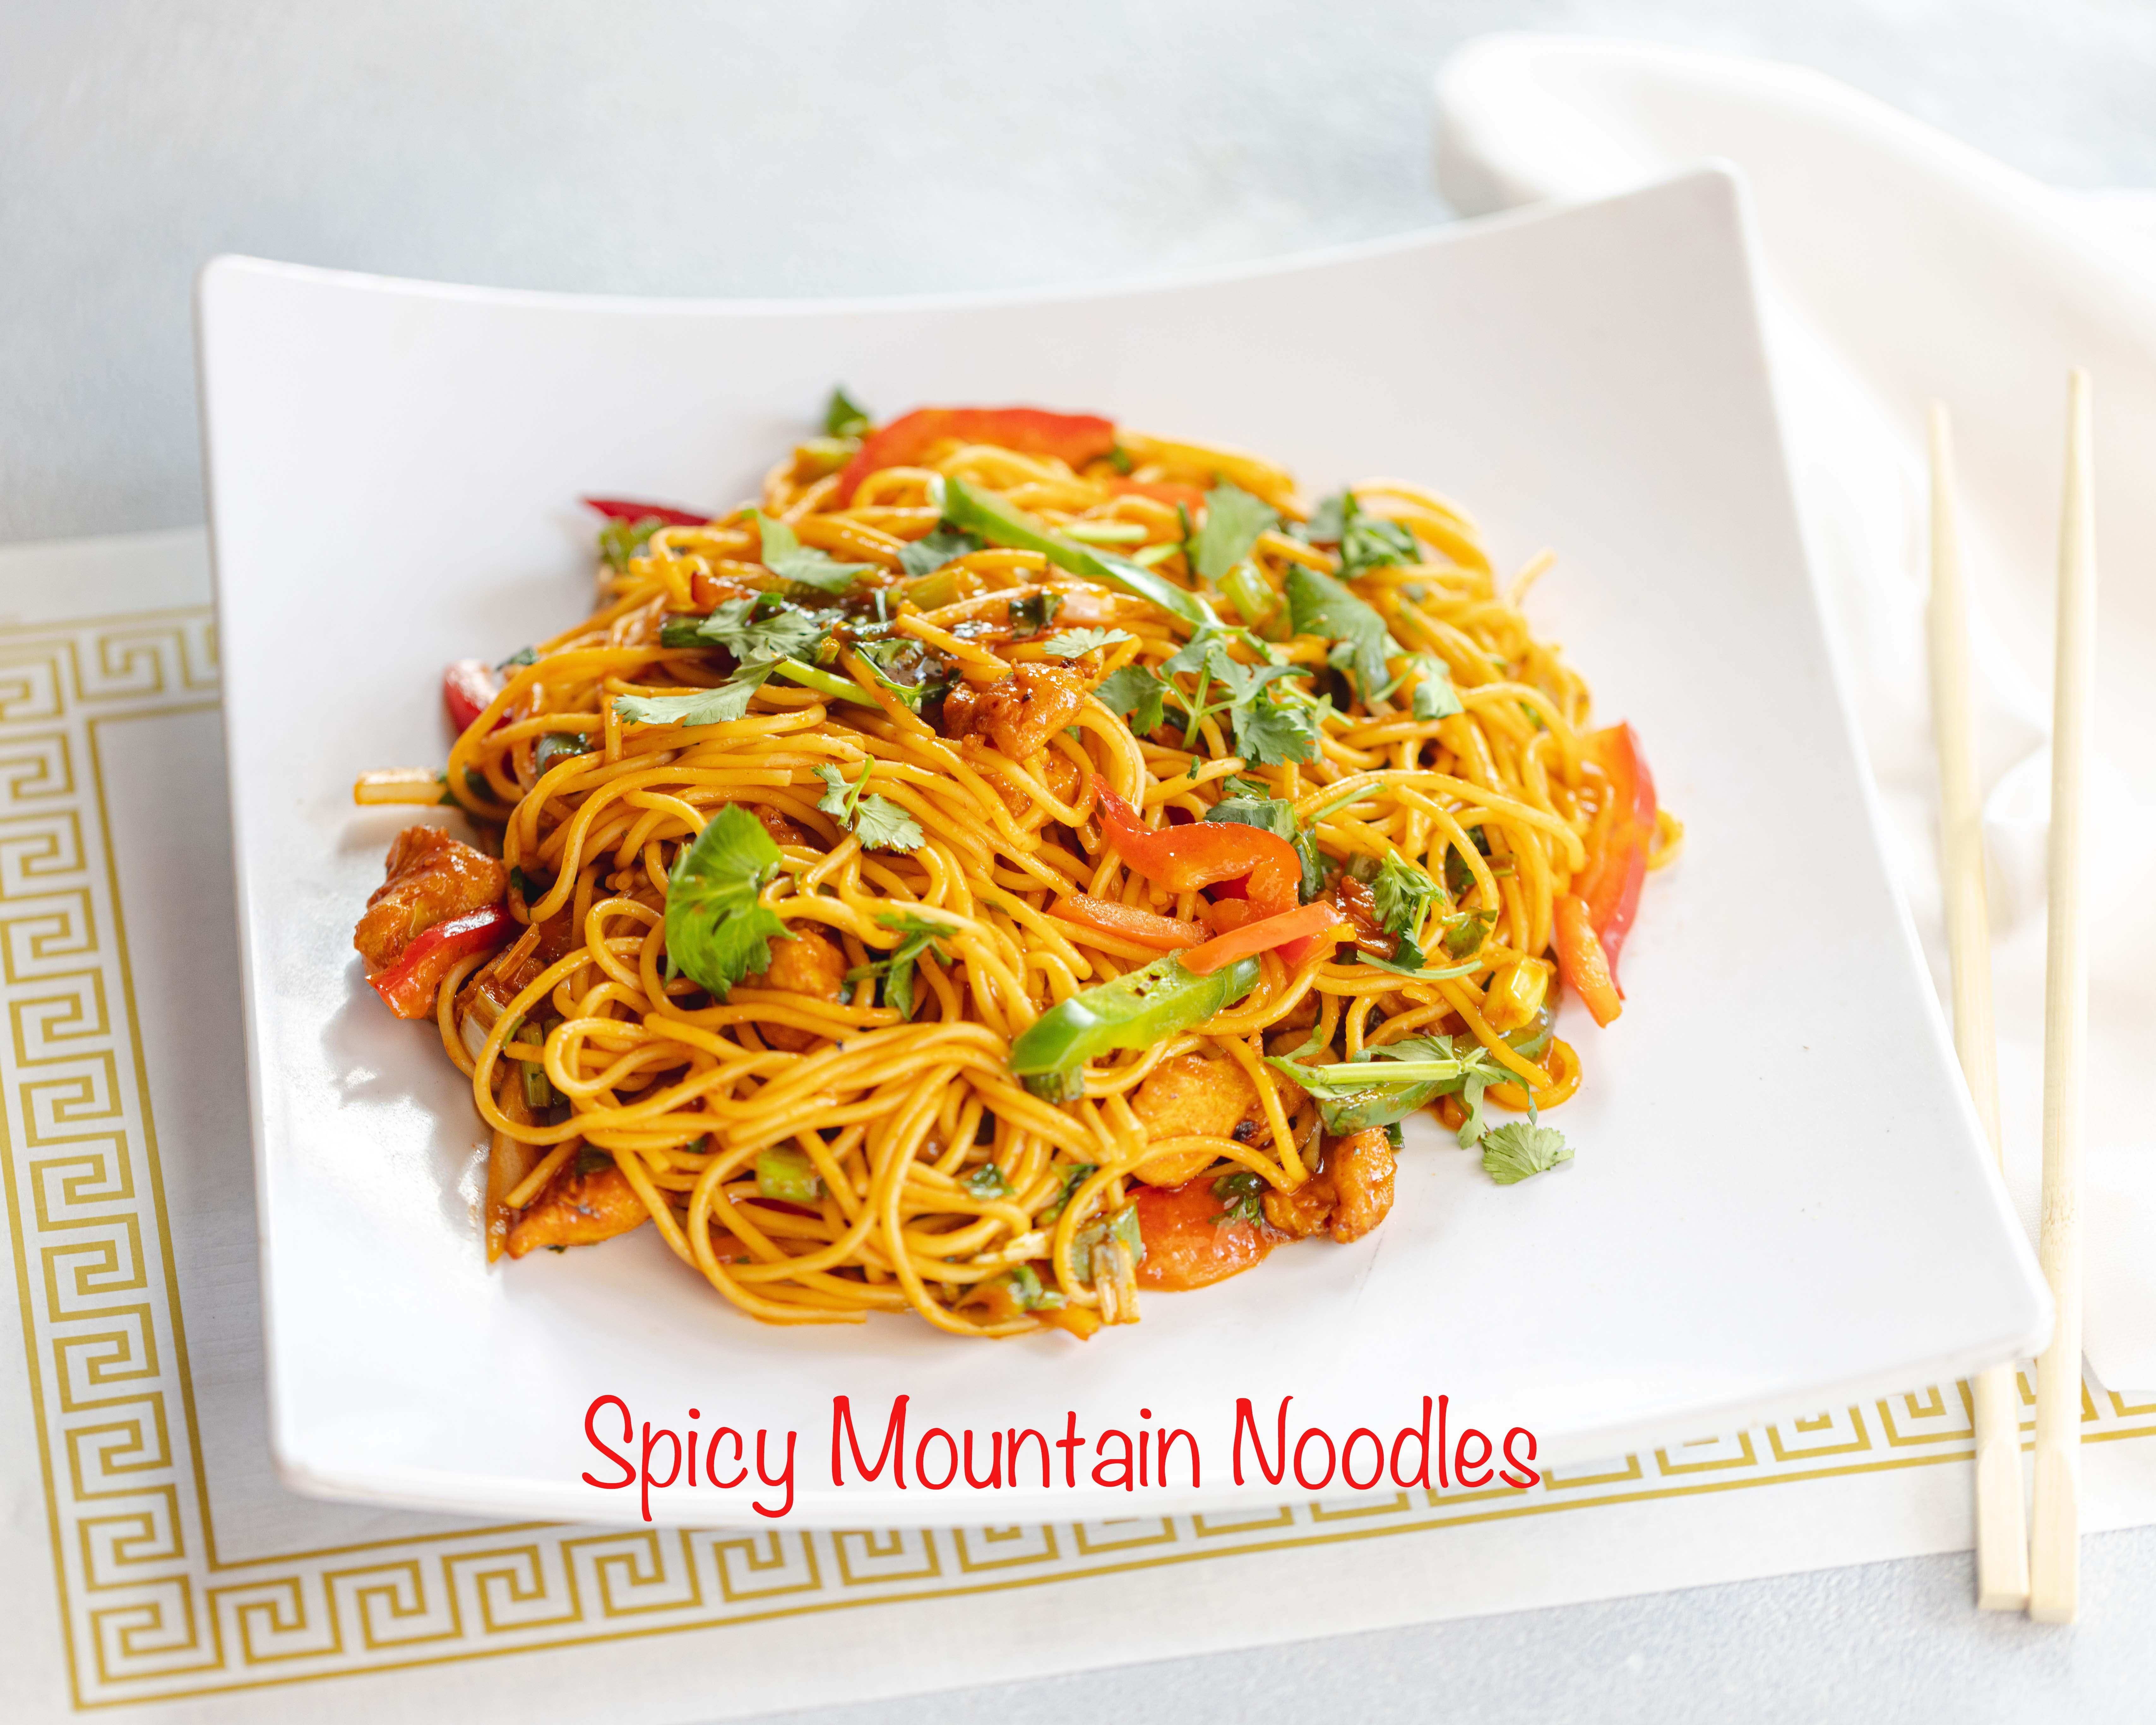 Spicy Mountain Noodles